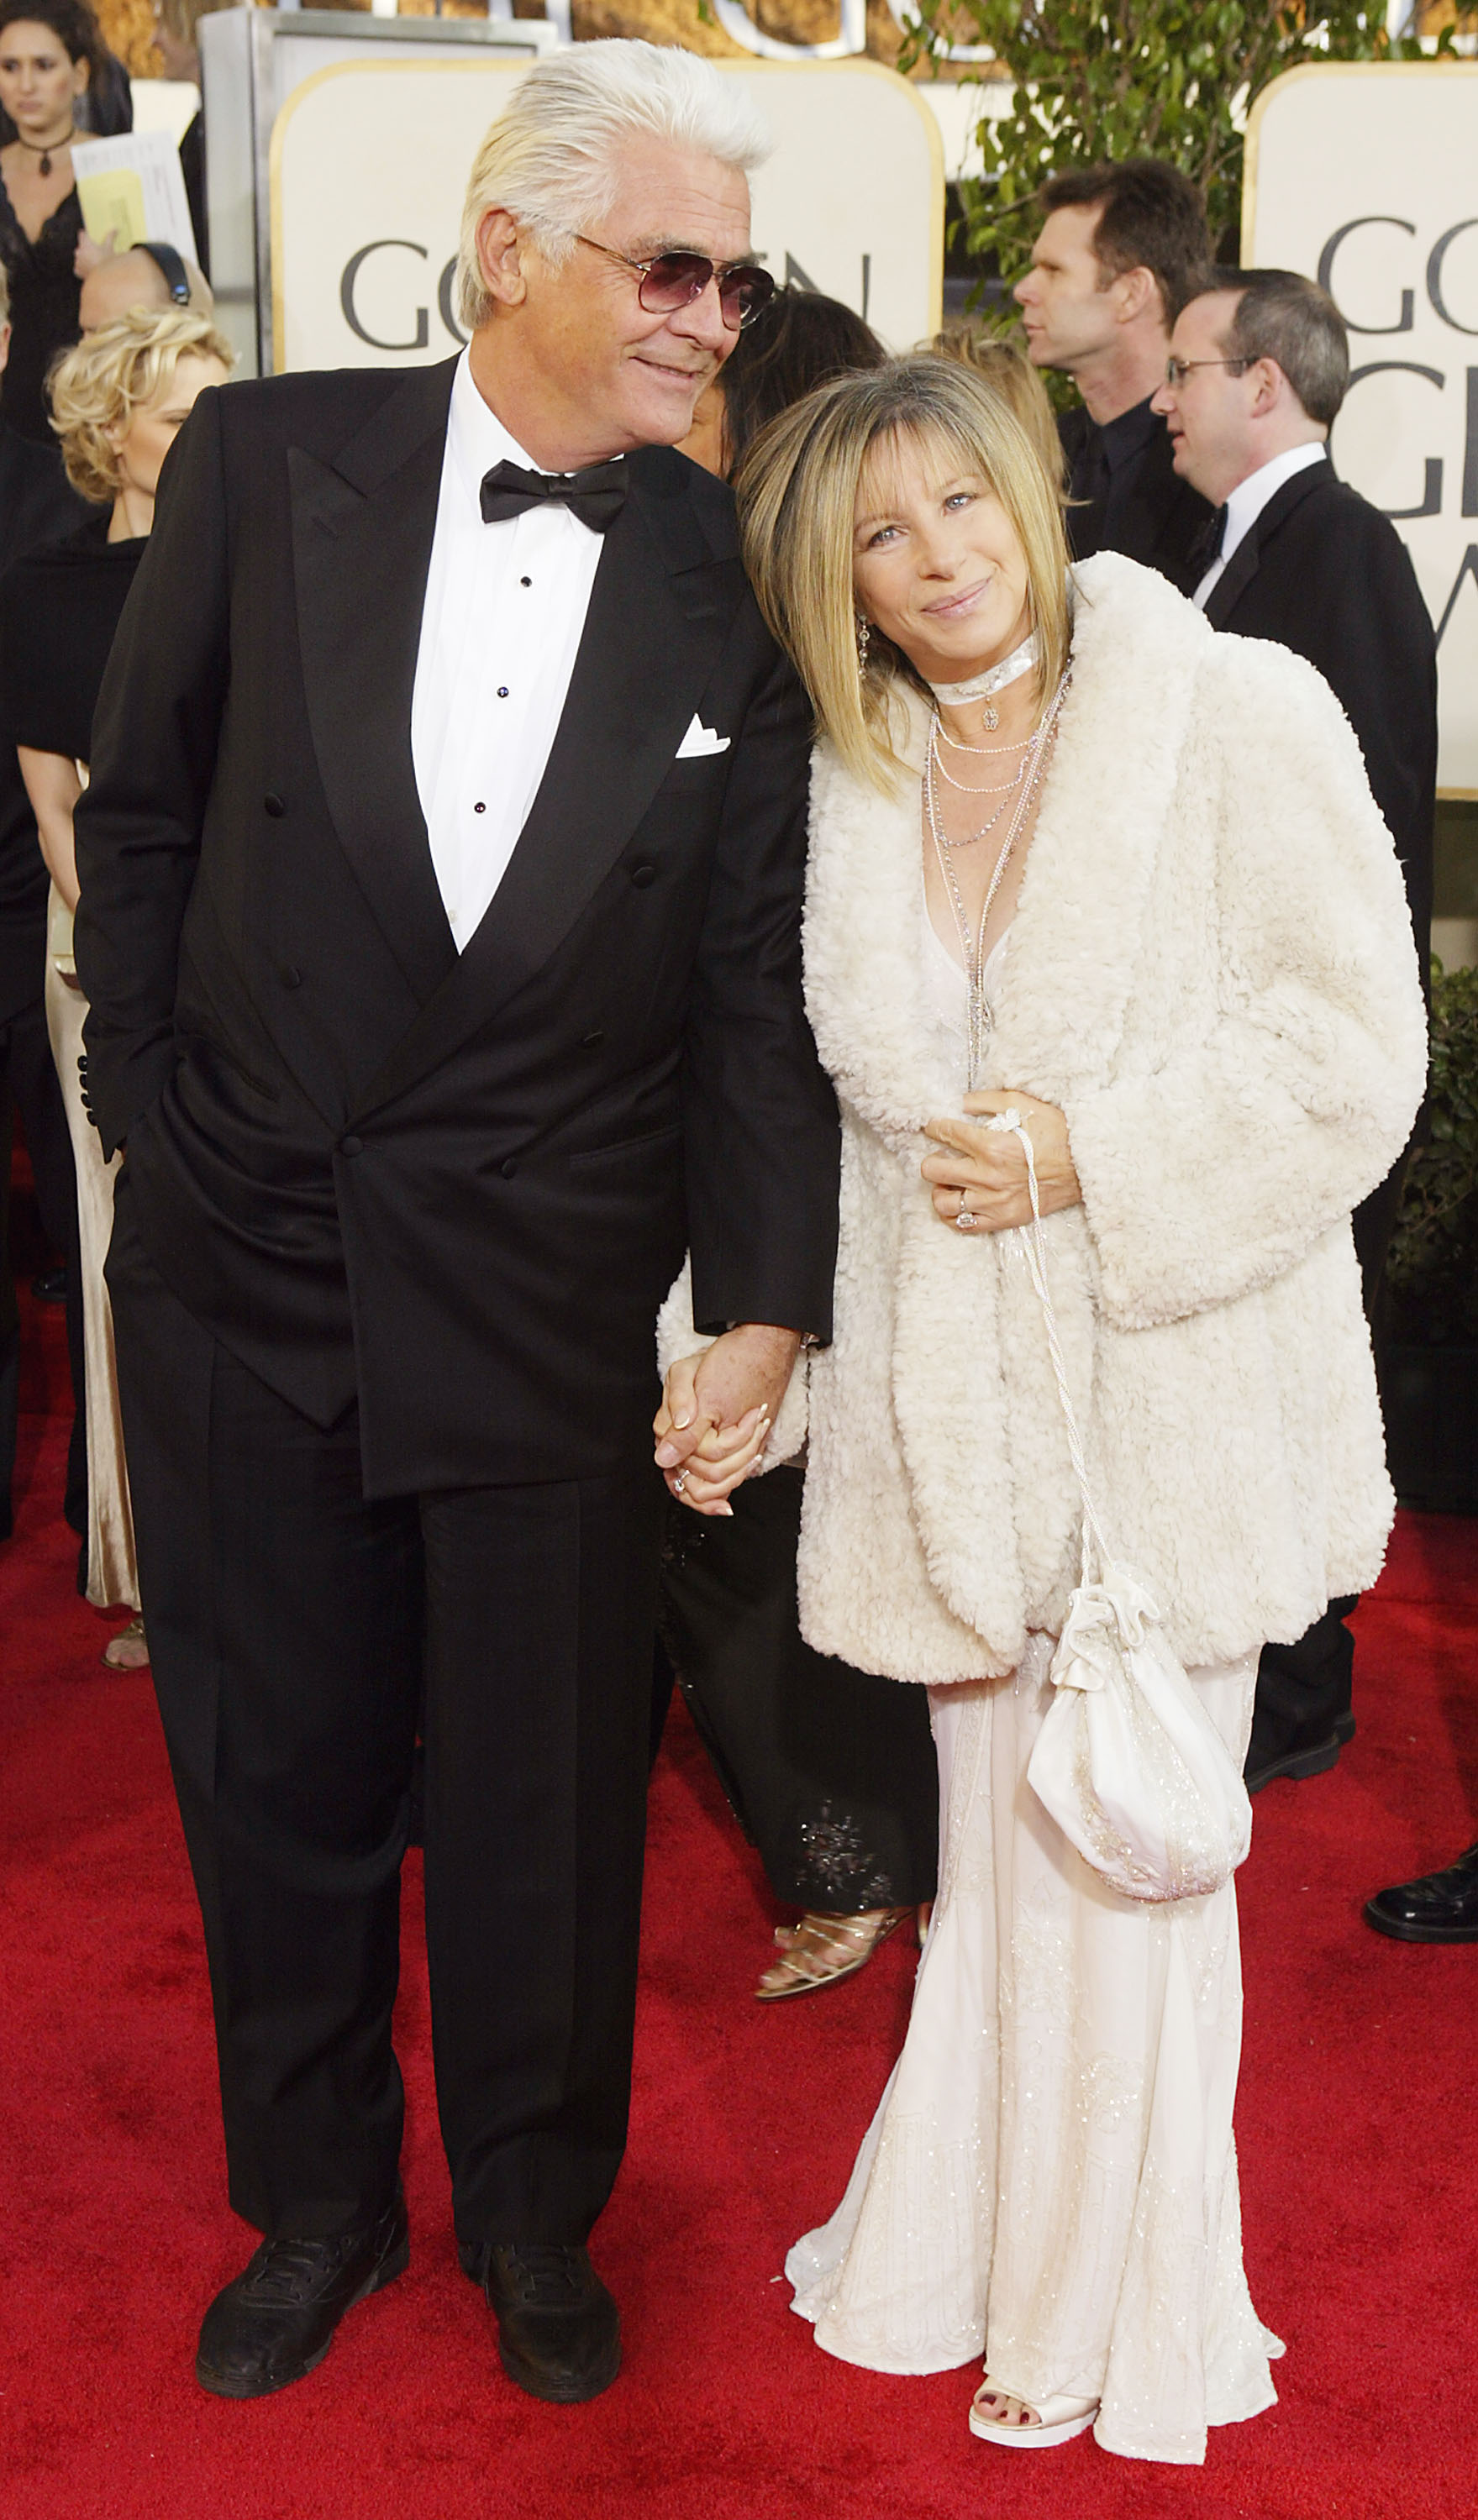 James Brolin and Barbra Streisand at the 61st Annual Golden Globe Awards in Beverly Hills, California on January 25, 2004 | Source: Getty Images